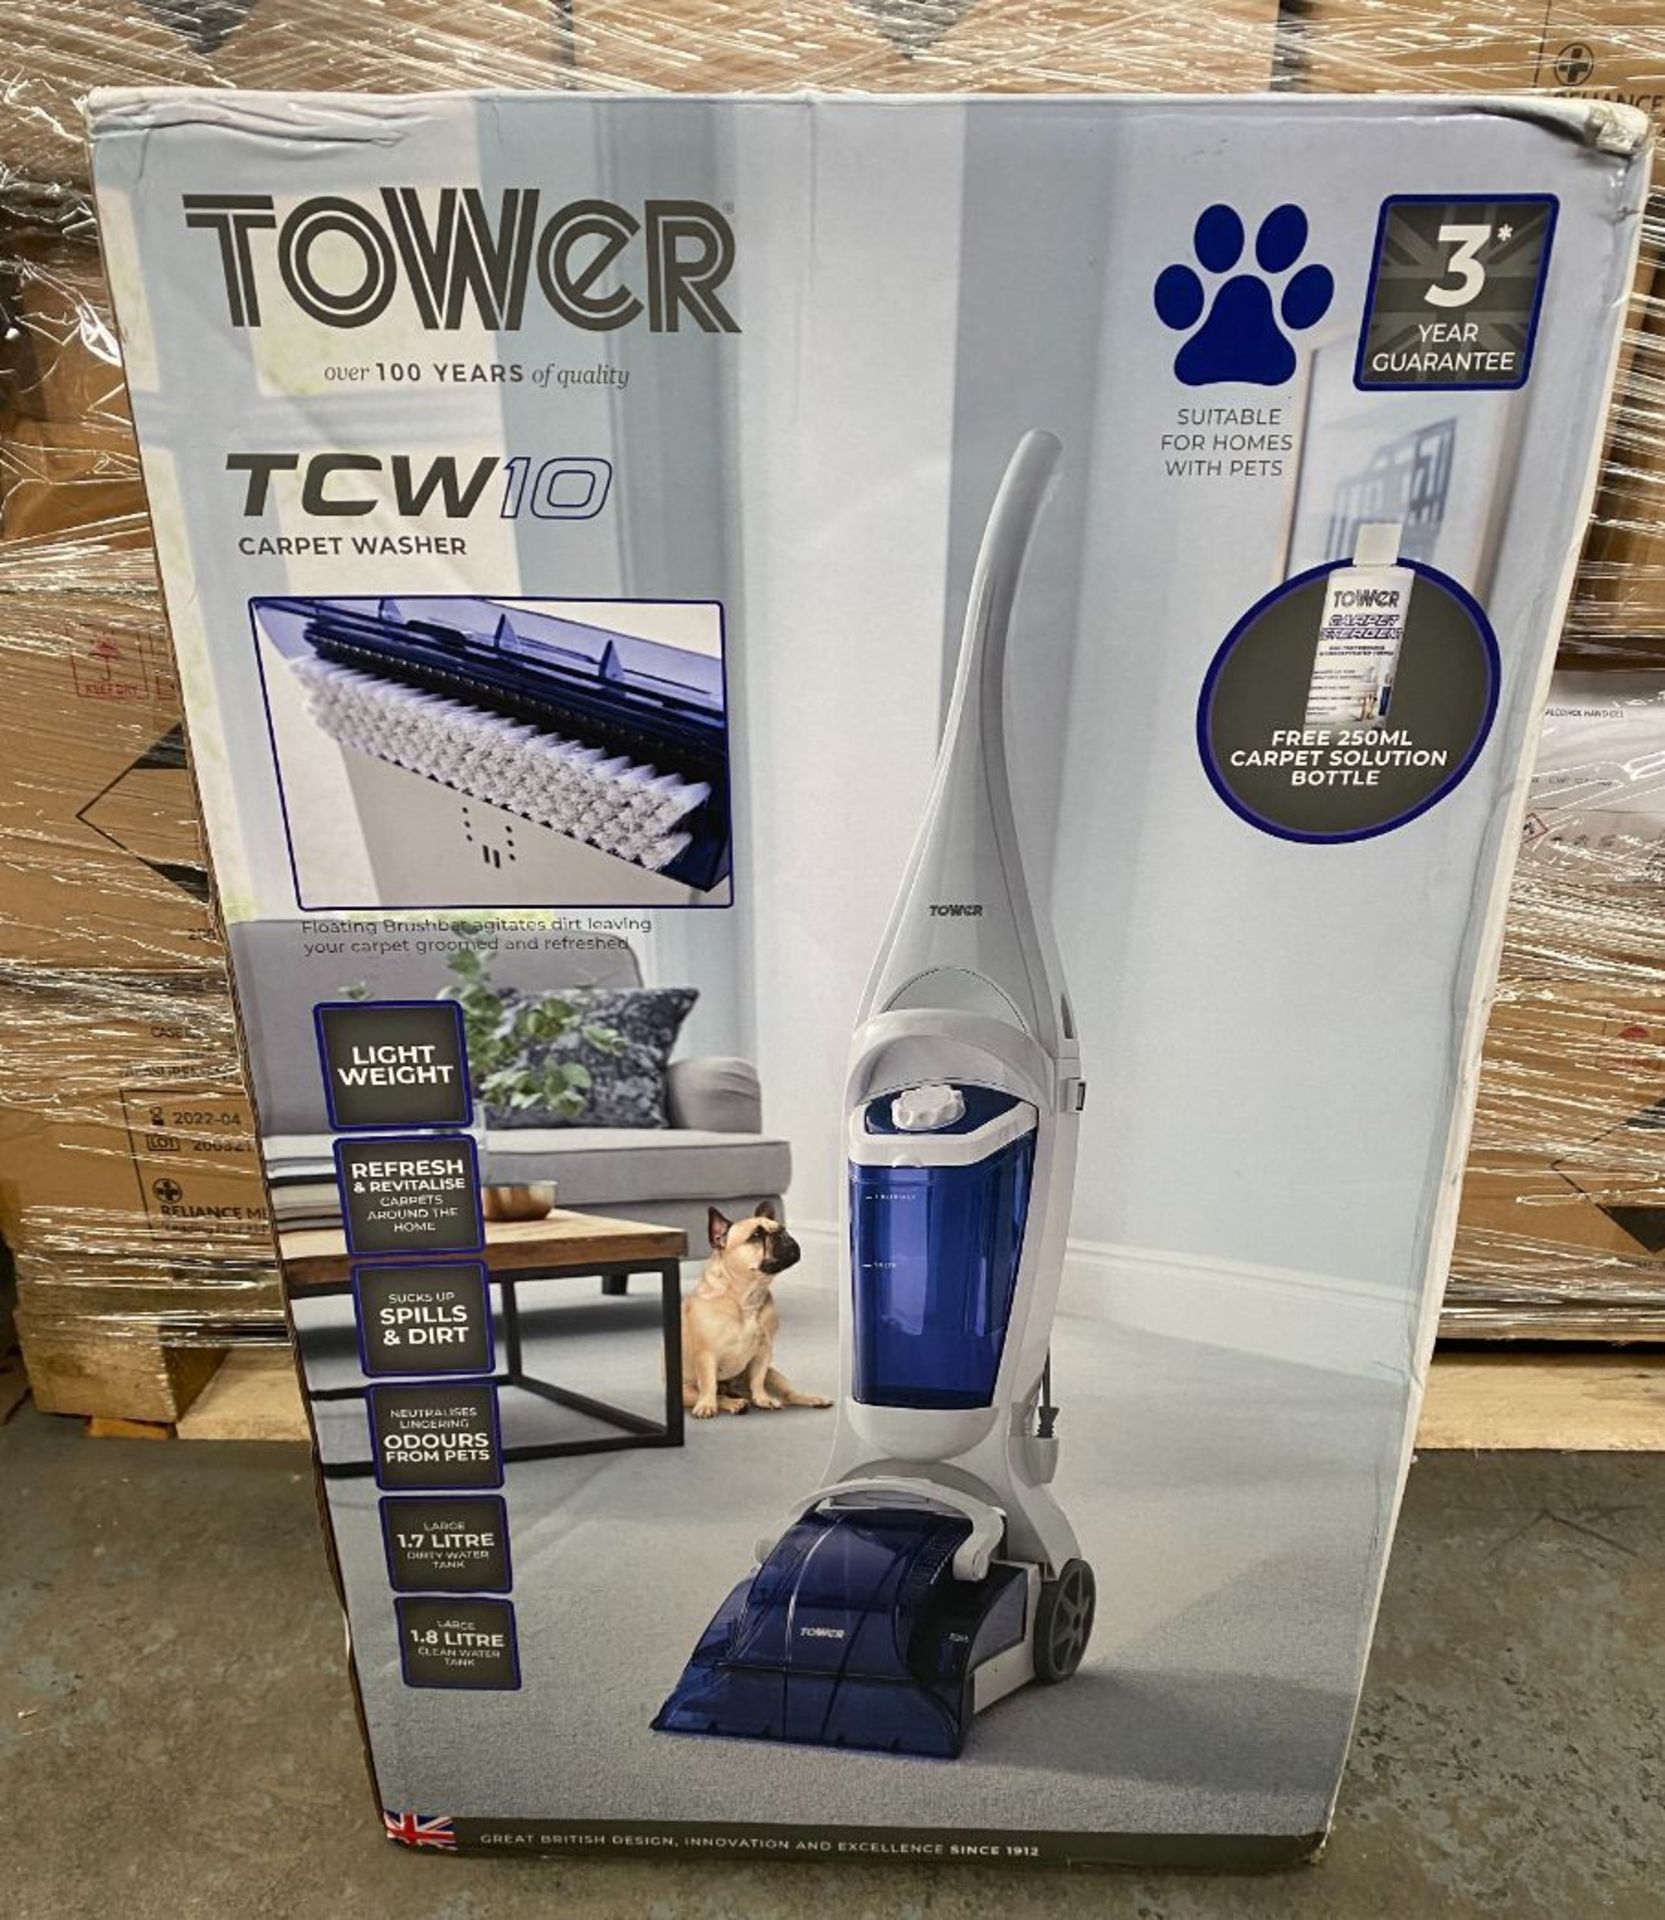 1 X TOWER TCW 10 CARPET WASHER / RRP £89.99